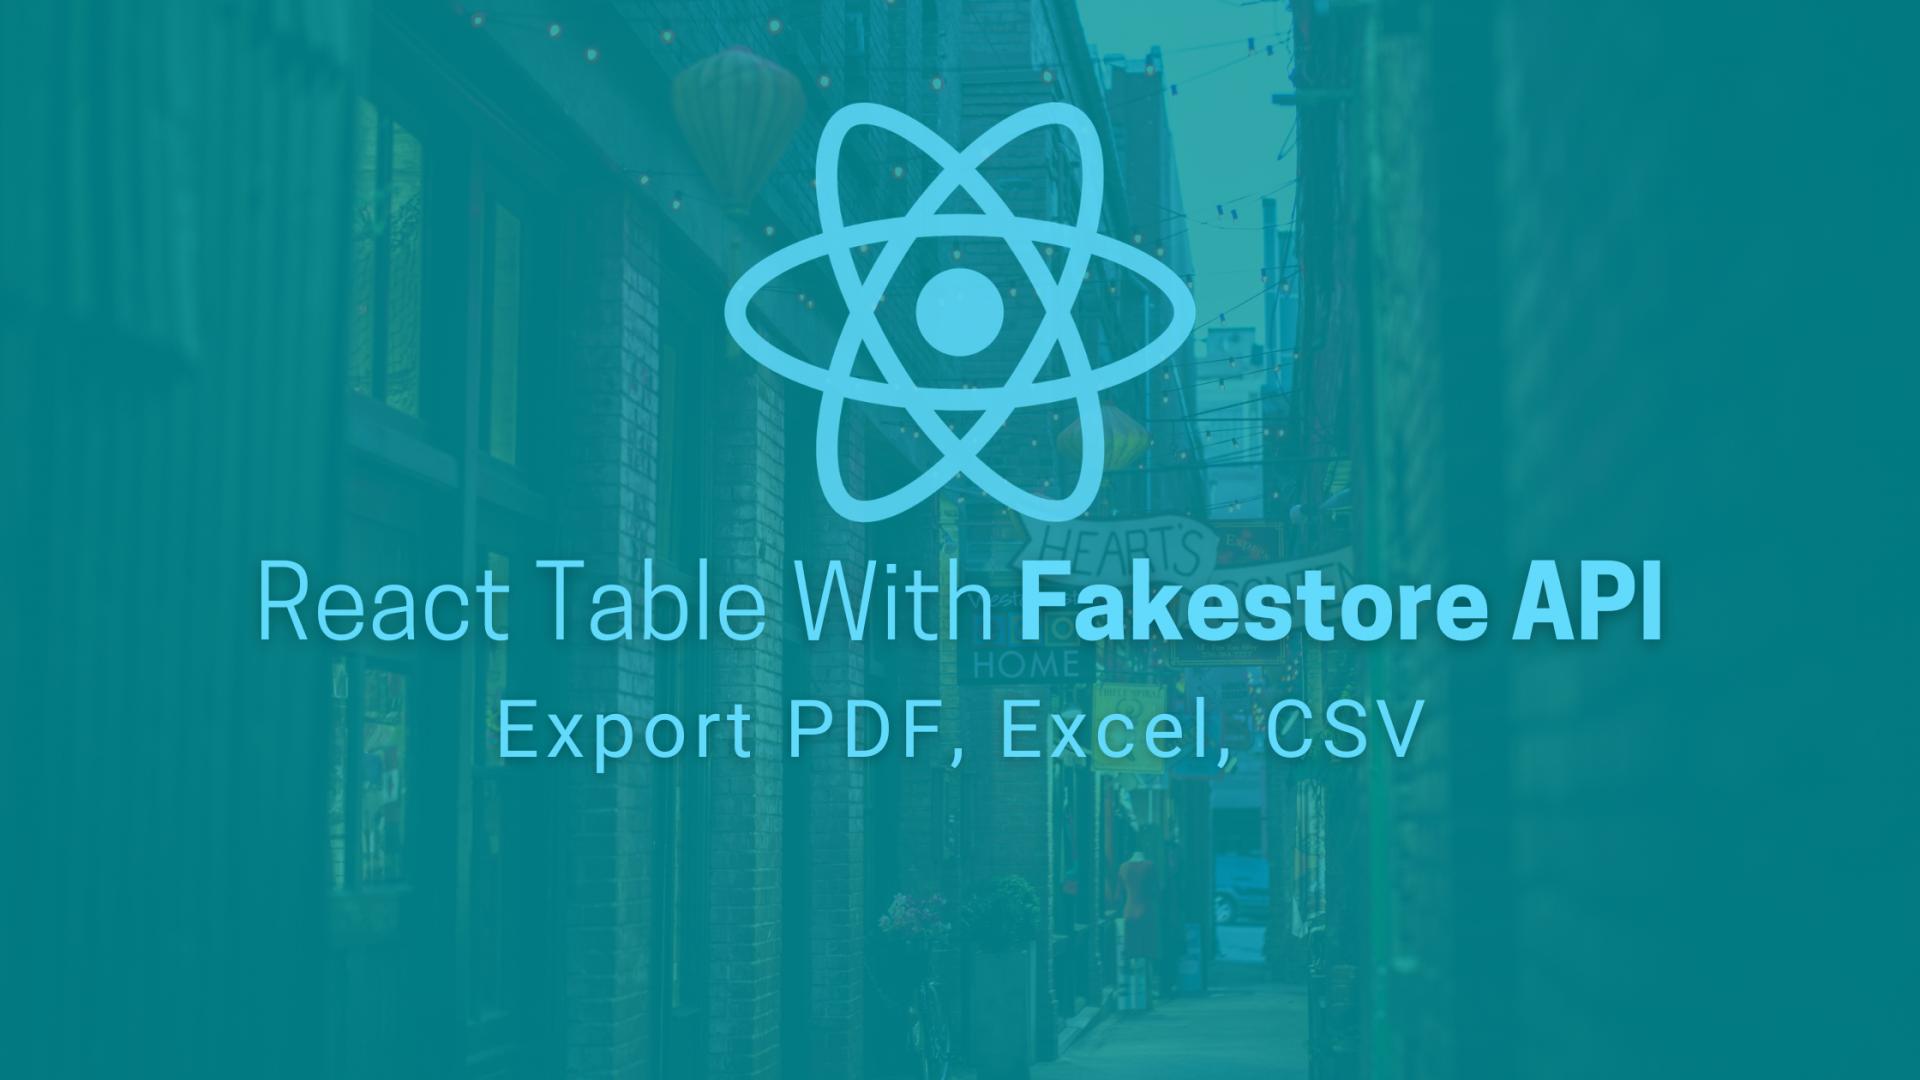 Getting Started With React Table With Fakestore API #4 : Export PDF, Excel, CSV